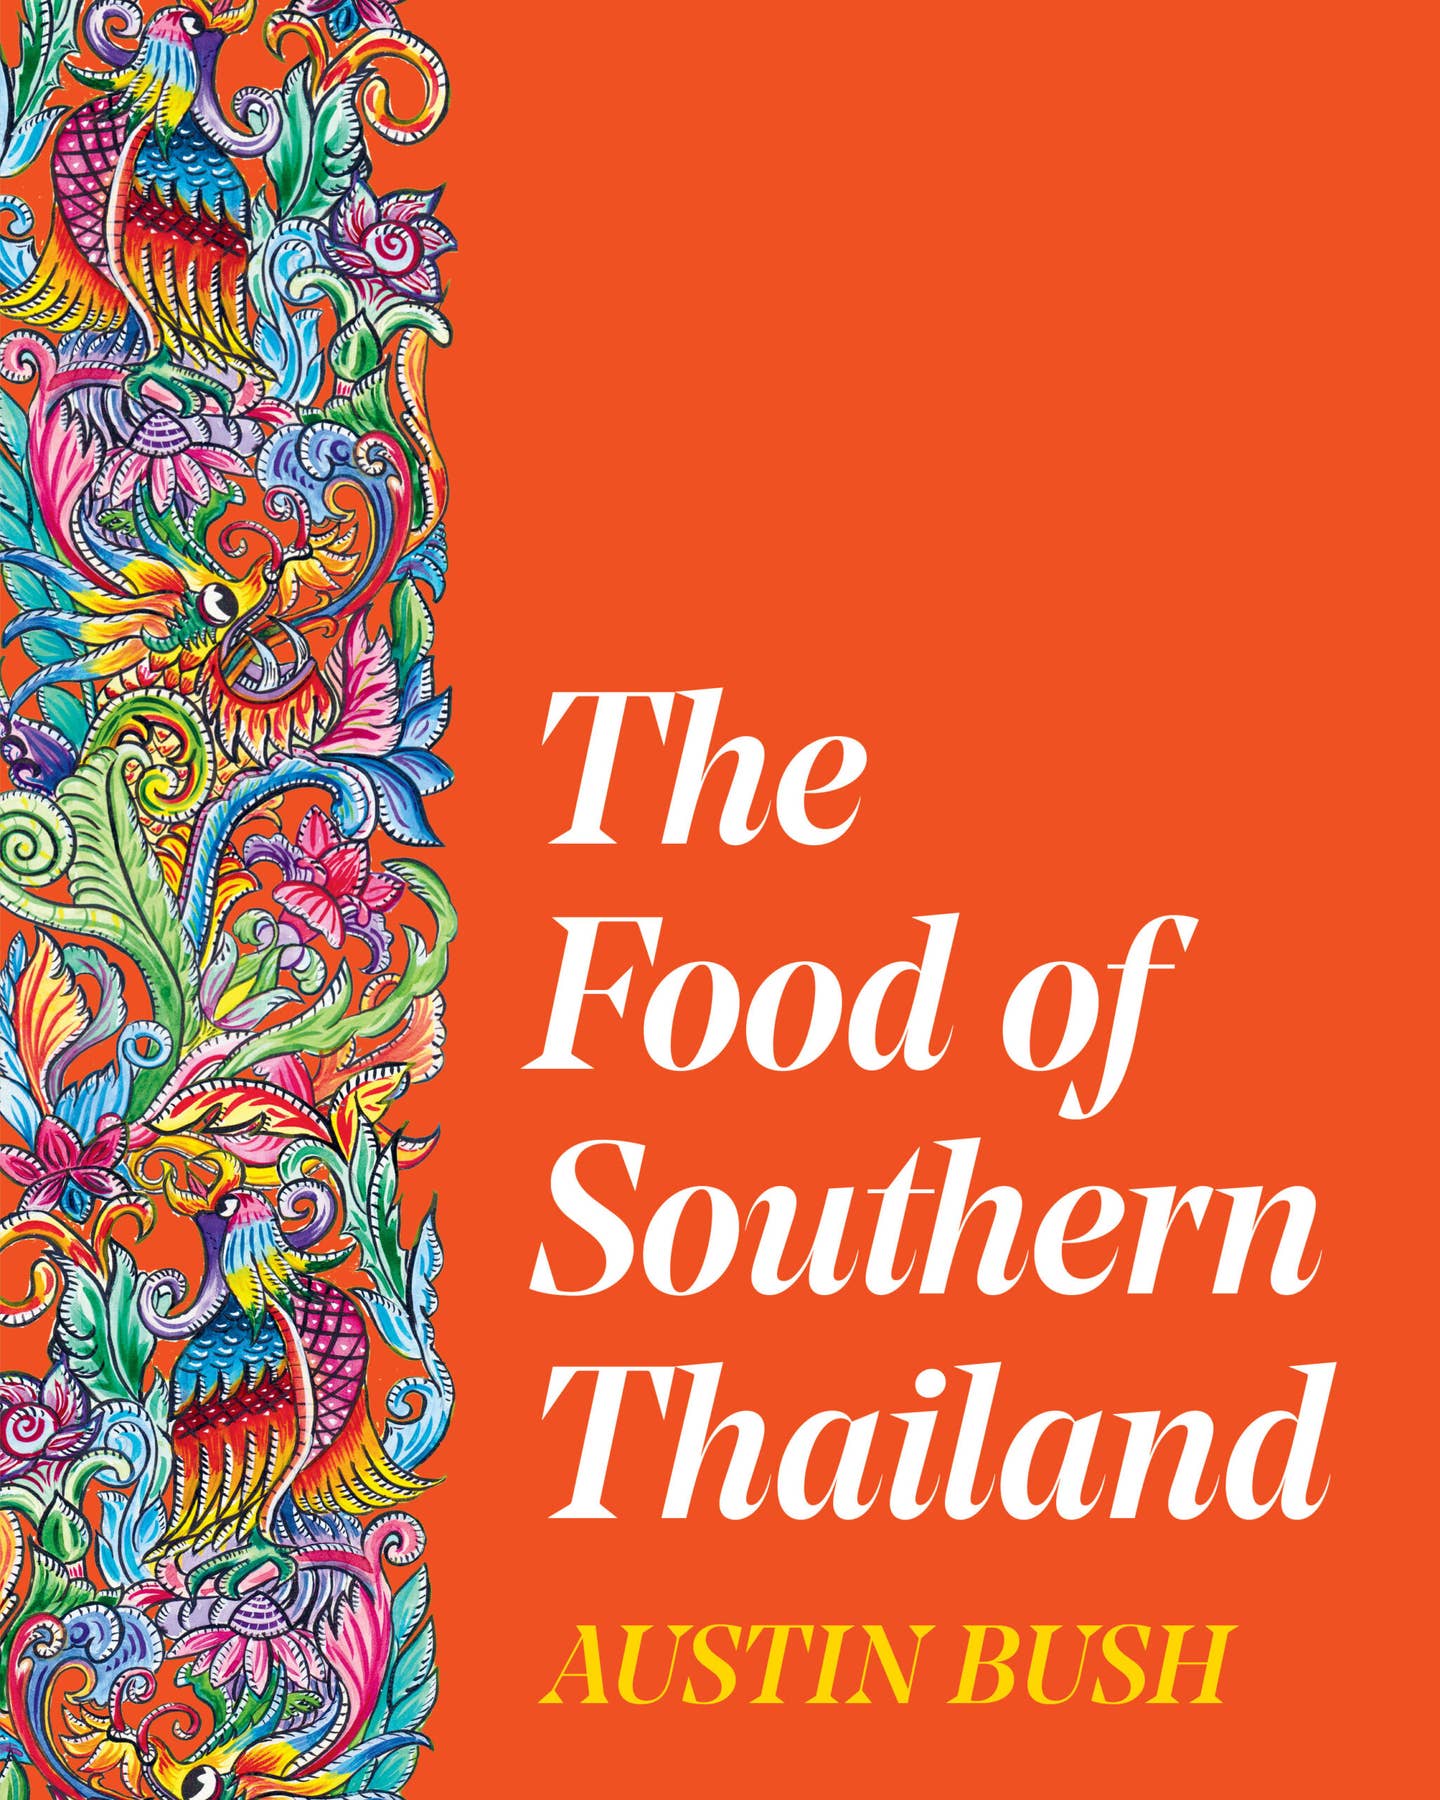 The Food of Southern Thailand cookbook cover